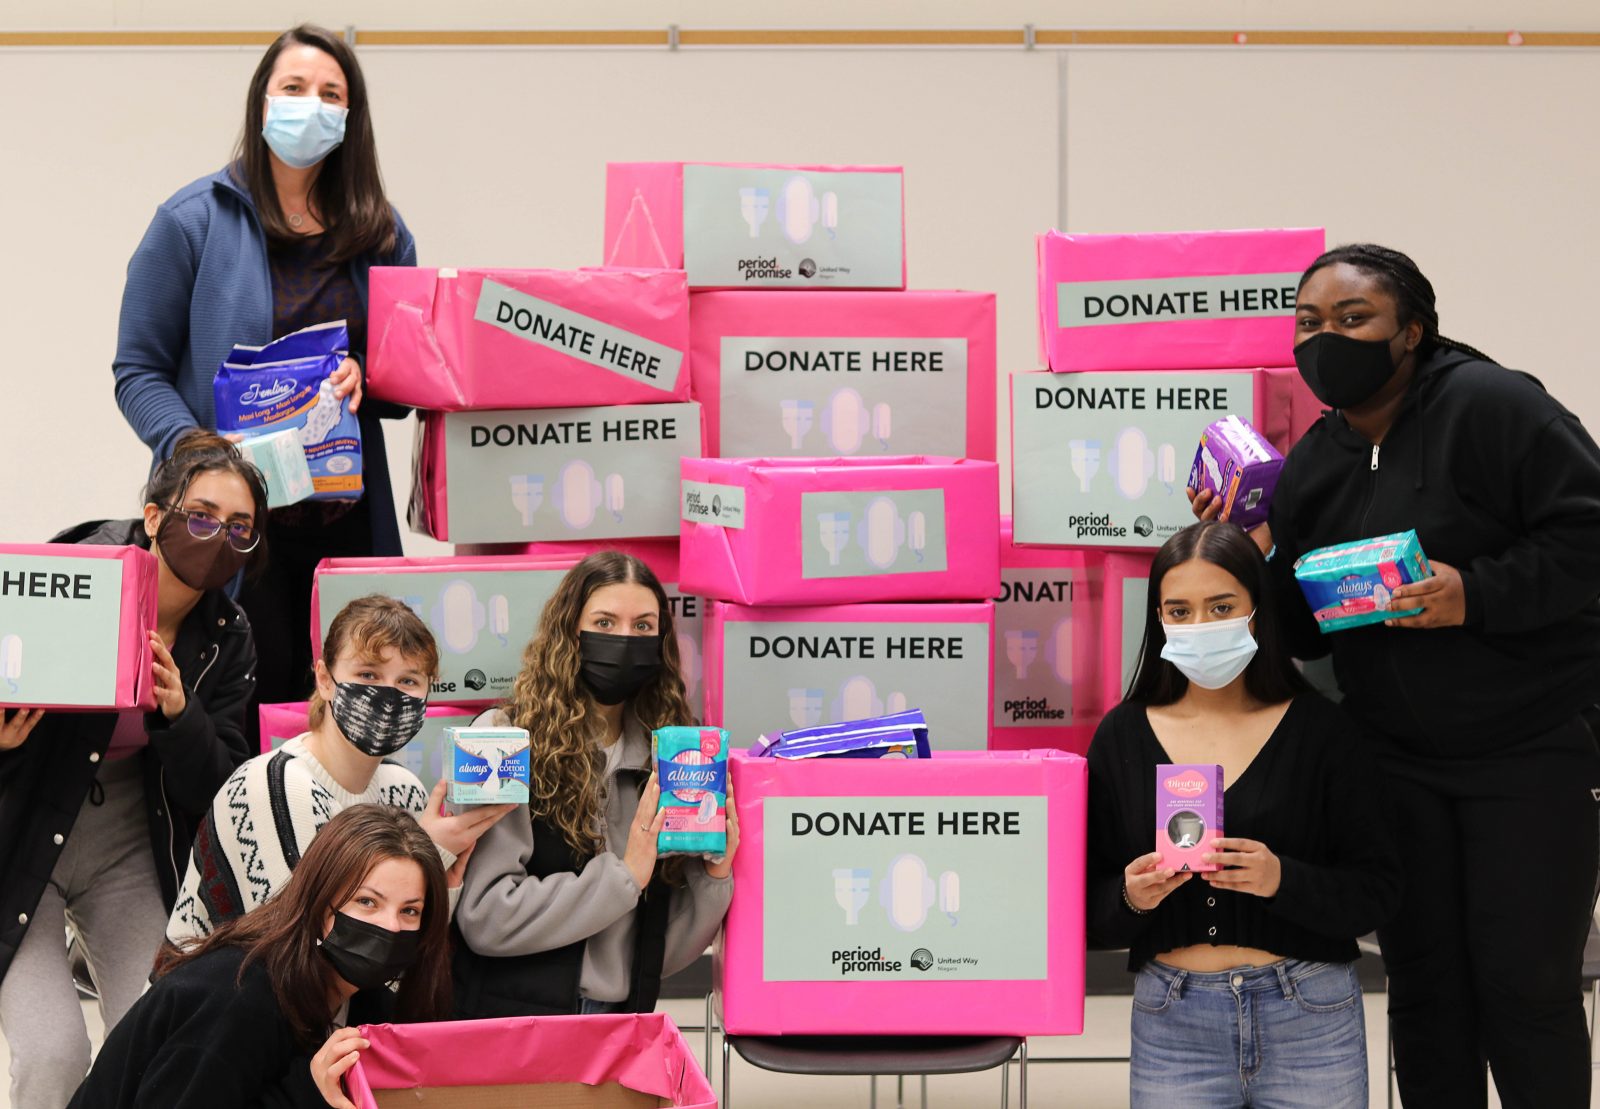 Seven masked women stand around pink boxes with signs that say "Donate here" on them.